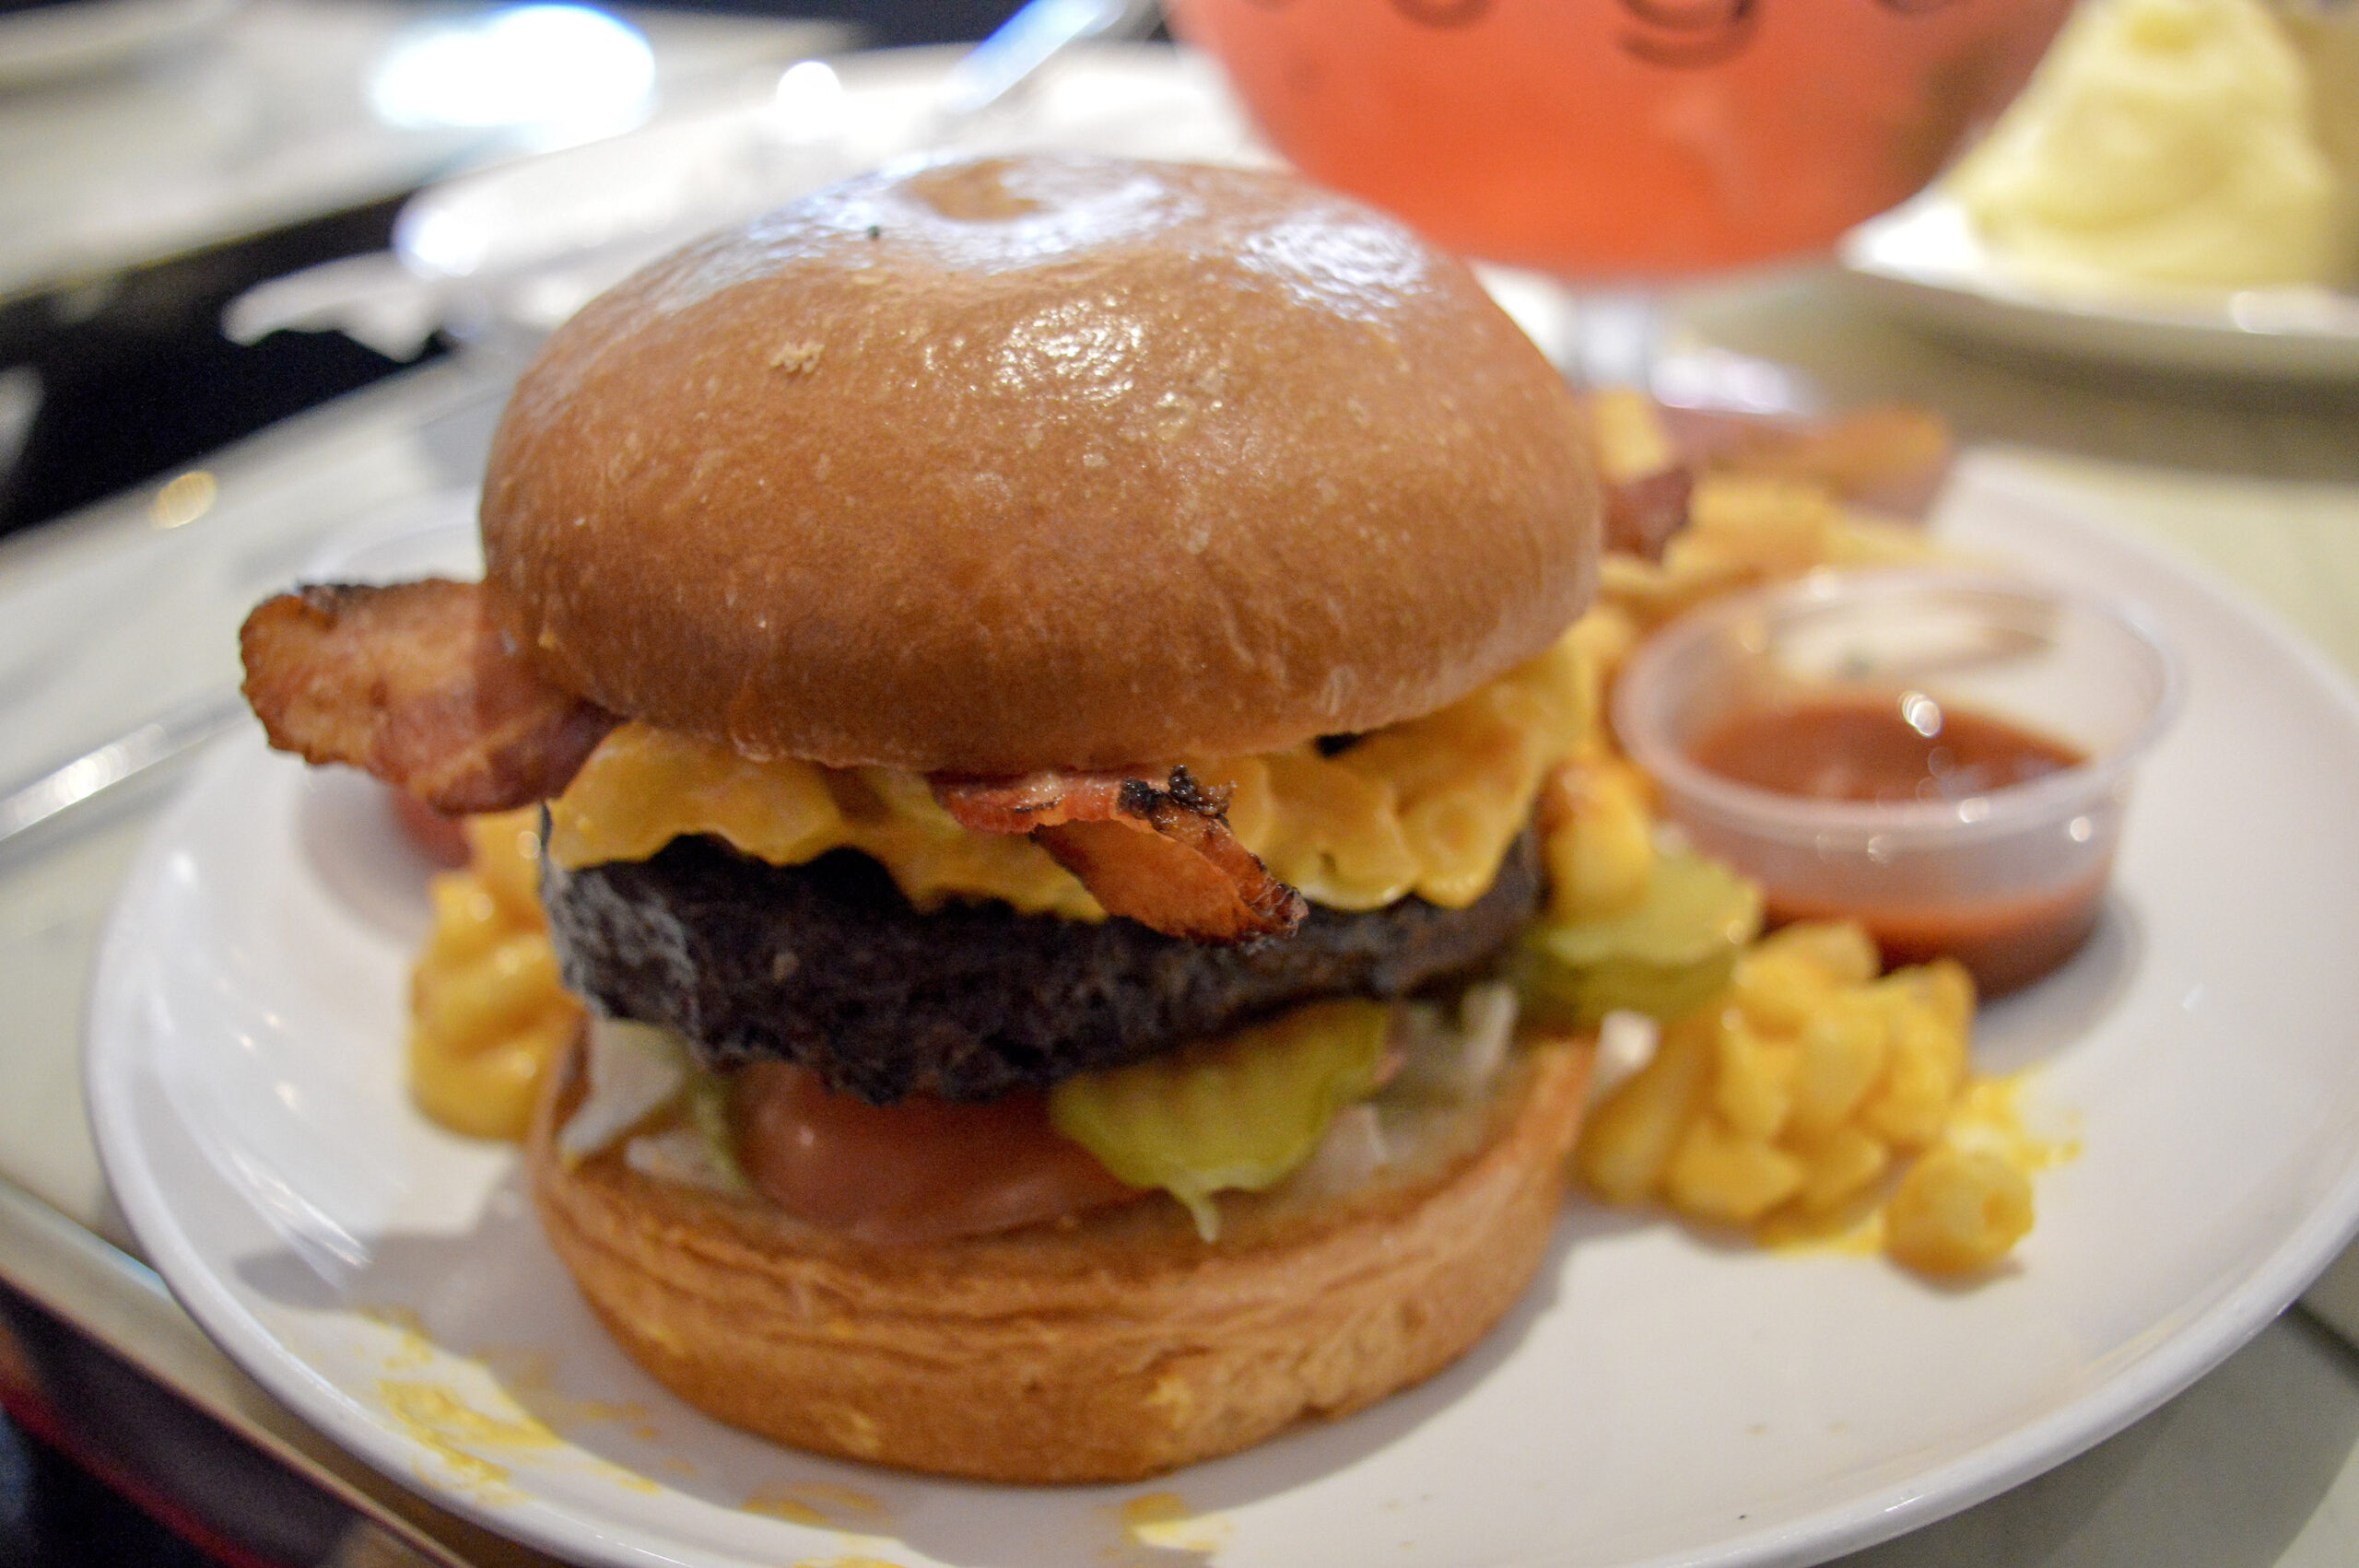 The Big Cheesy at Sugar Factory at Fashion Show Mall | Where's good to eat in Las Vegas | Places to eat on and off the Strip - all budgets | The Social Media Virgin Lifestyle & Travel Blog